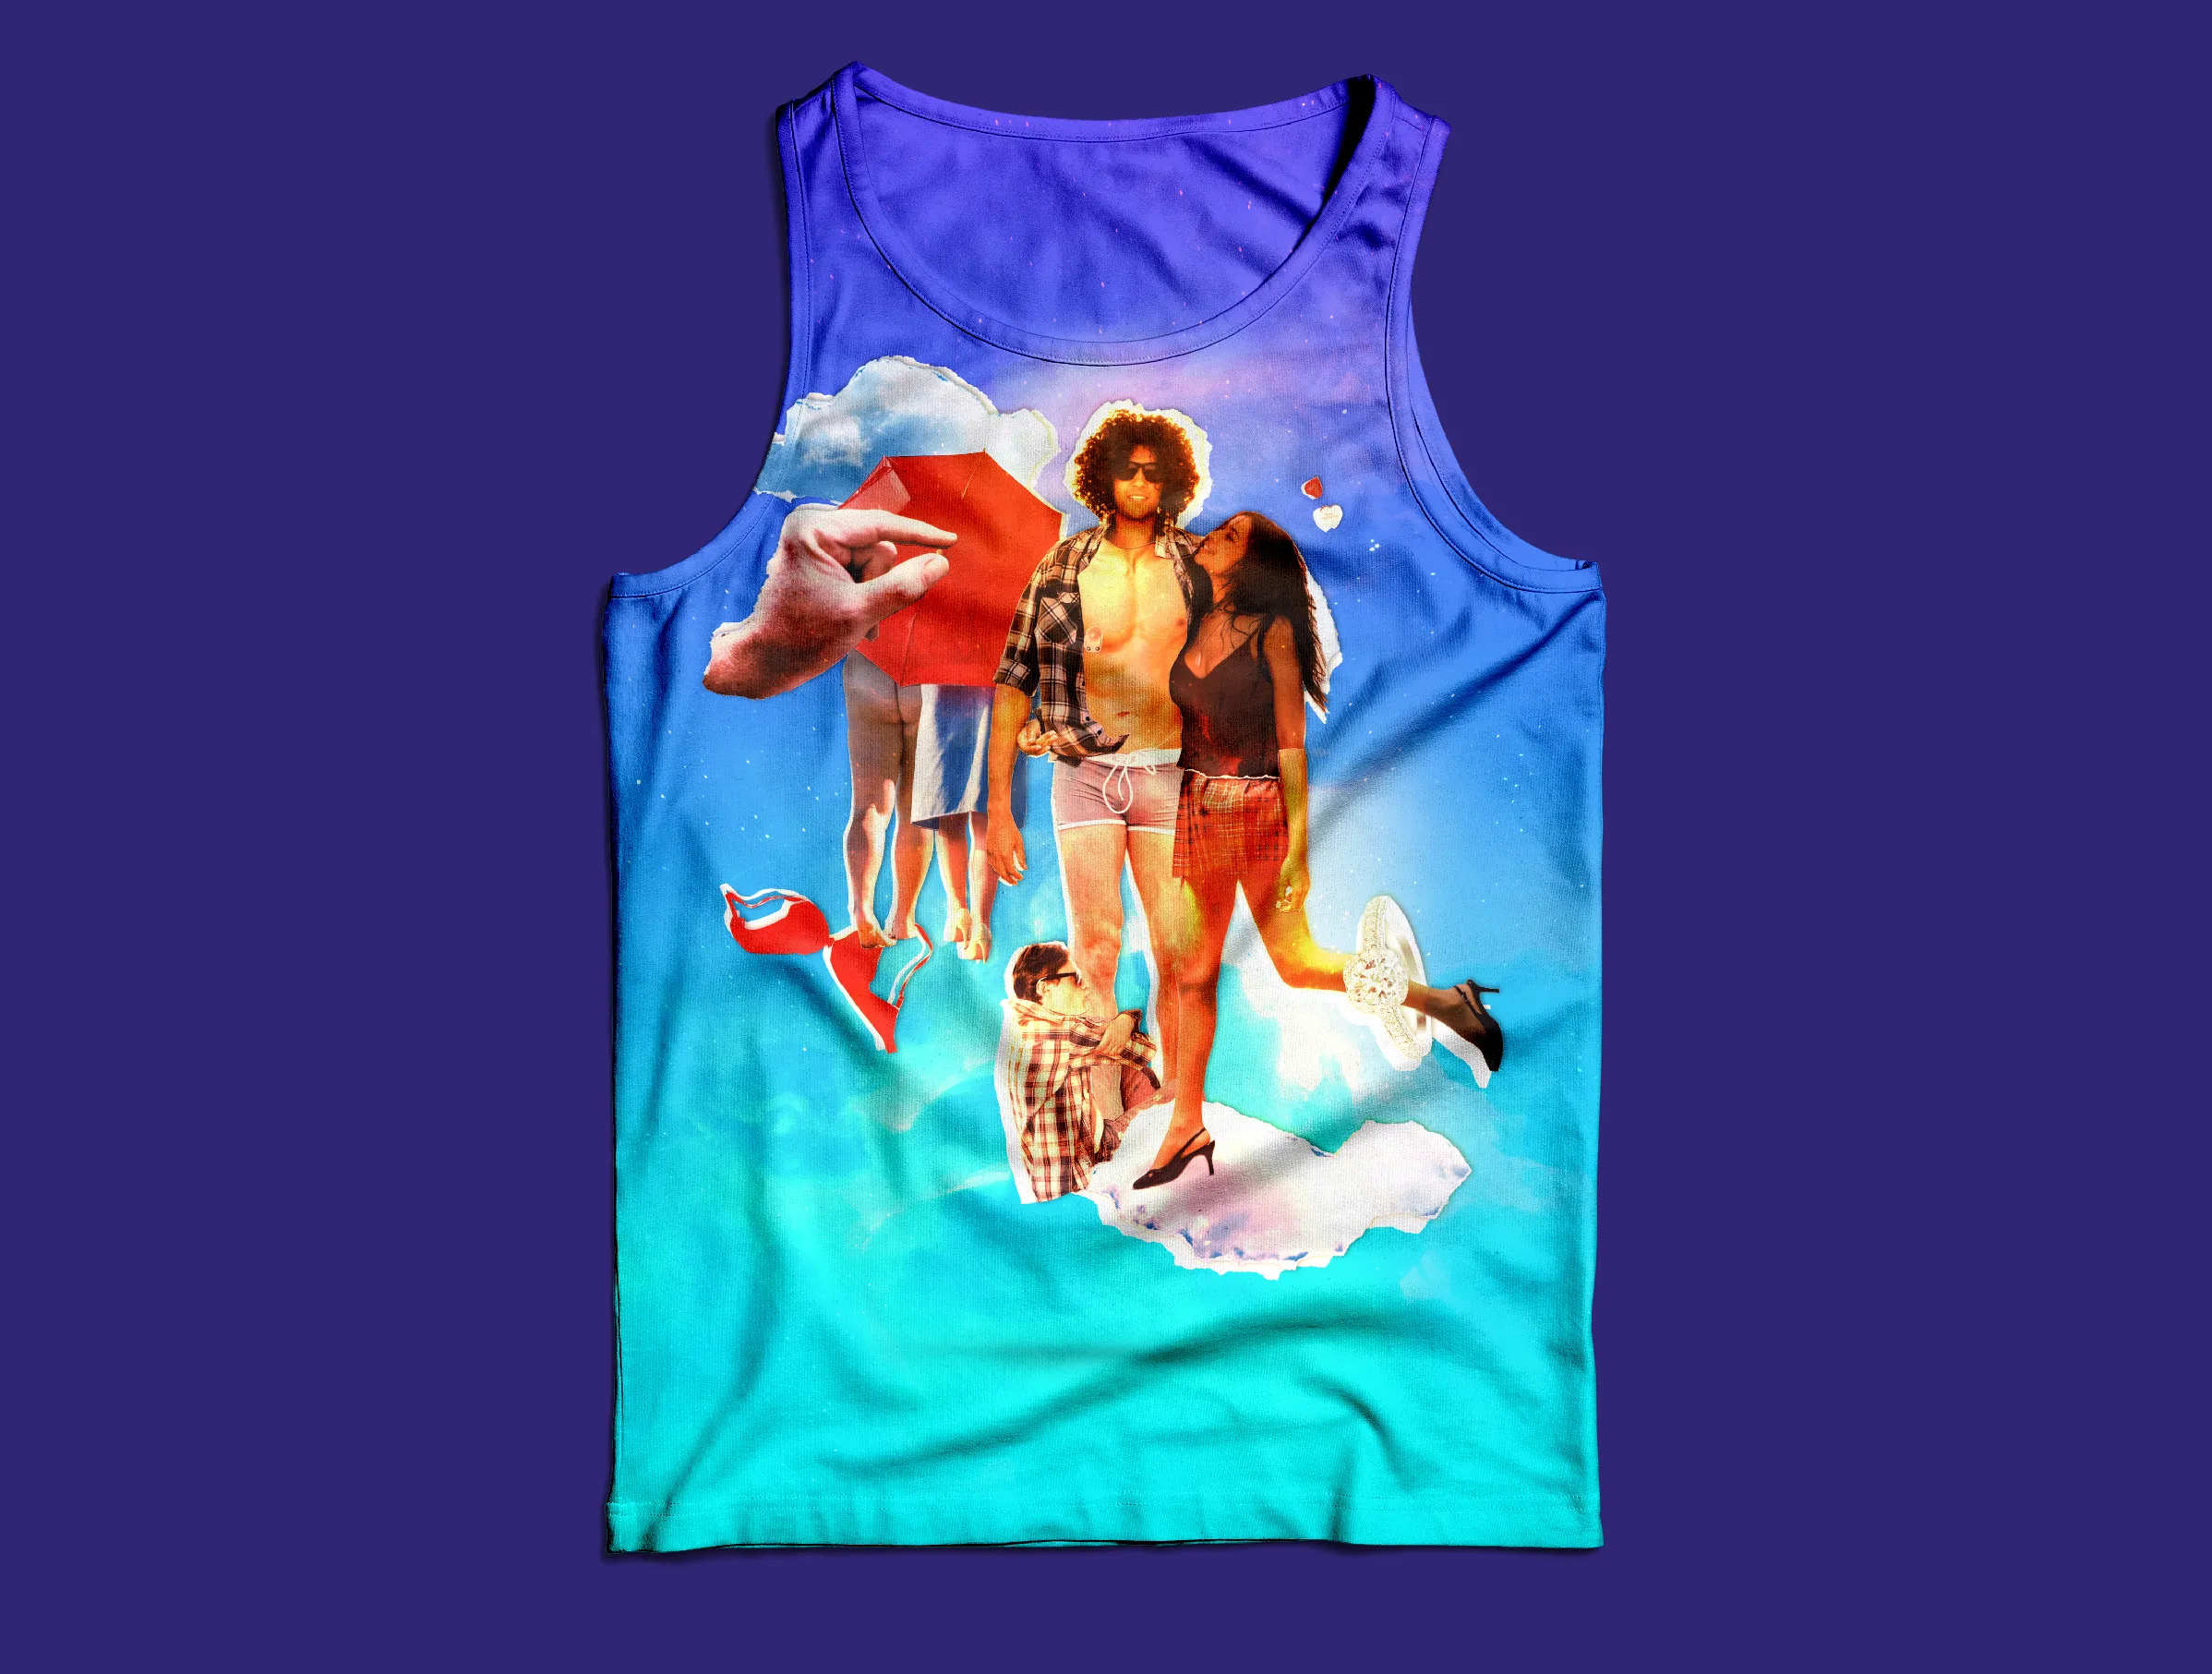 Colourful vest top showing the relationship collage